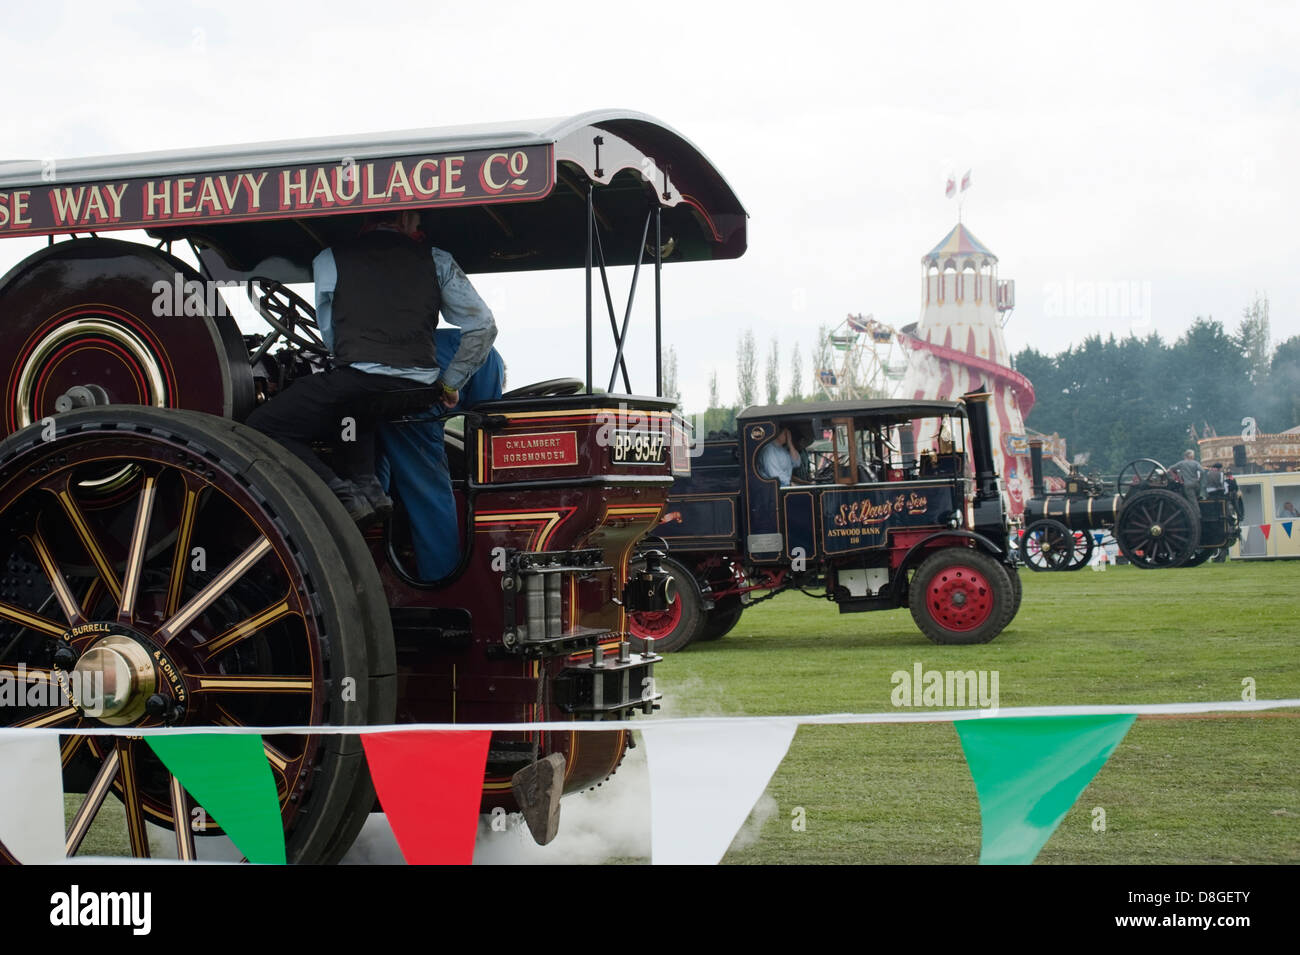 The Fawley Hill Steam and Vintage Transport Weekend event near Henley-on-Thames, Oxfordshire, England, UK. Stock Photo